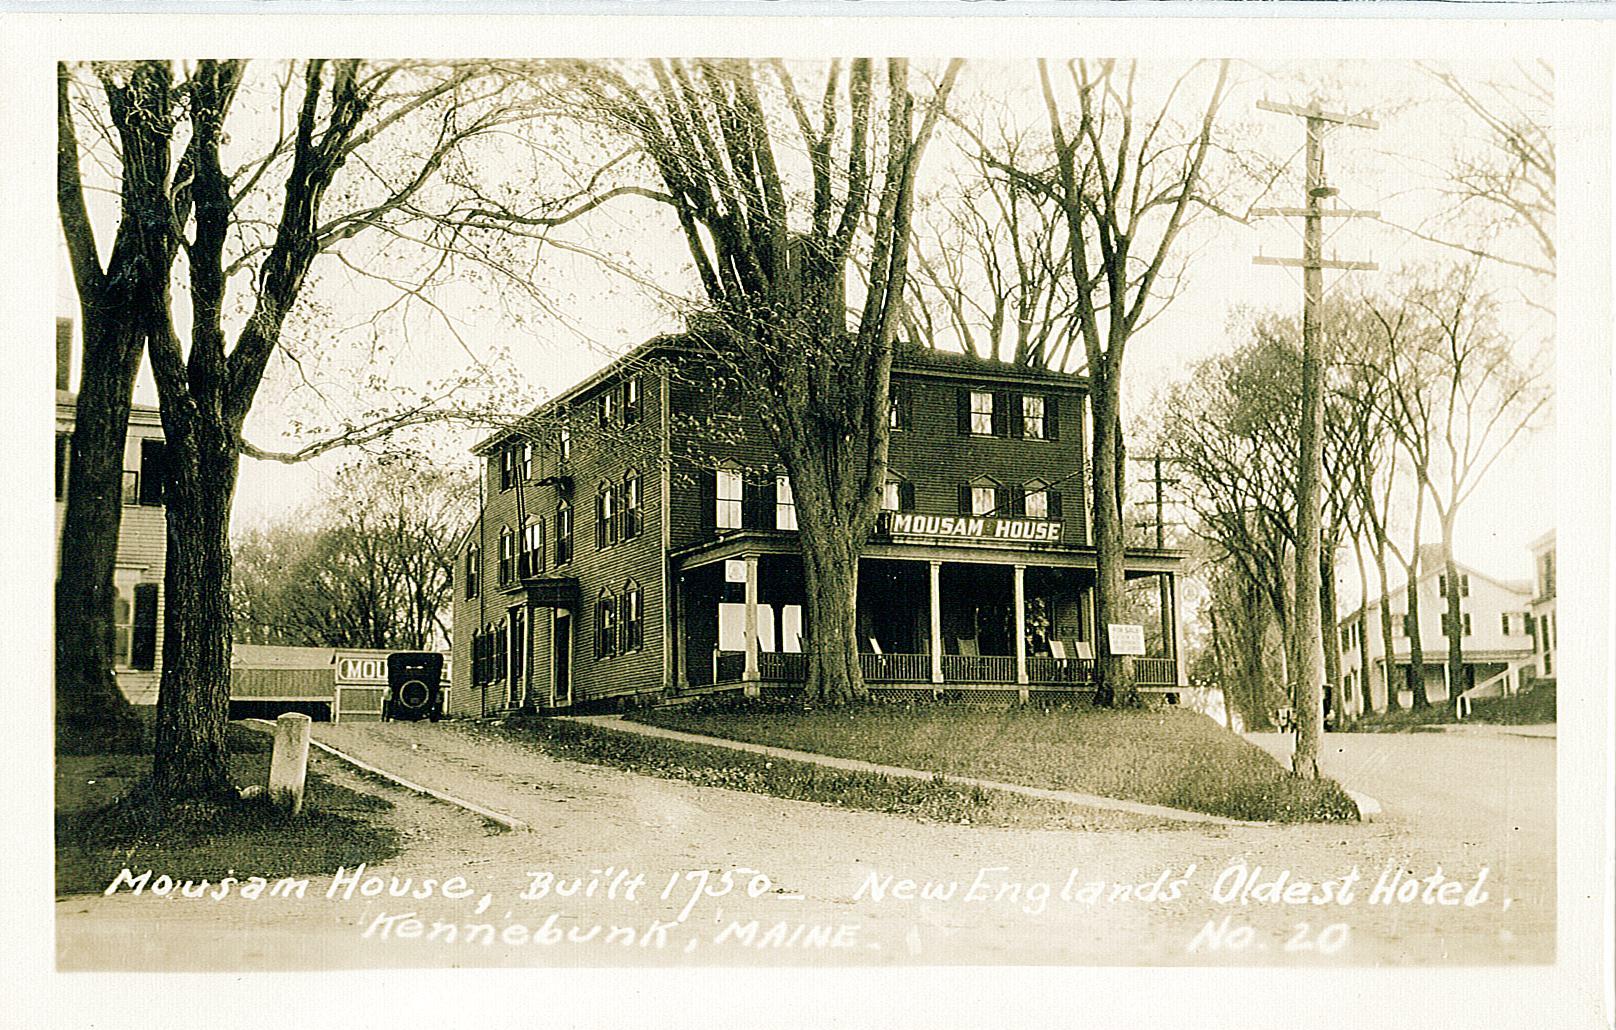 The Mousam House located on Main Street, 1937.